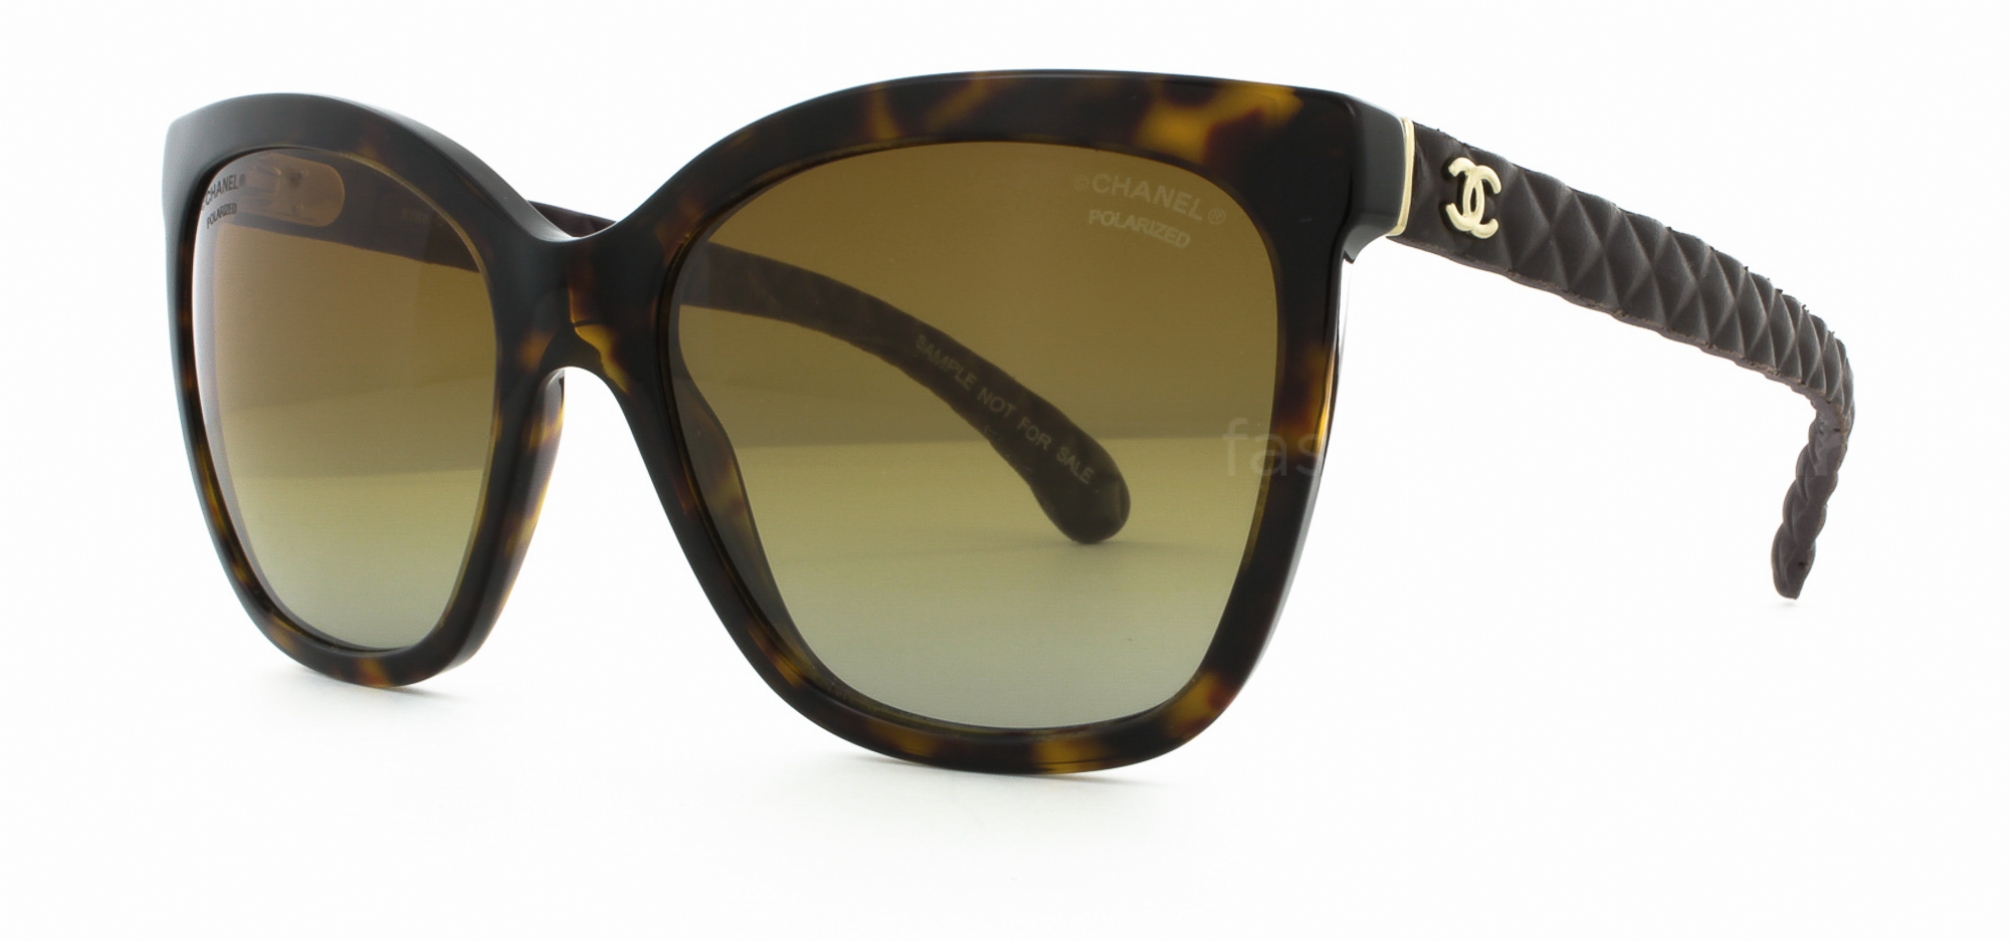 Chanel Butterfly Sunglasses 5288q | www.tapdance.org